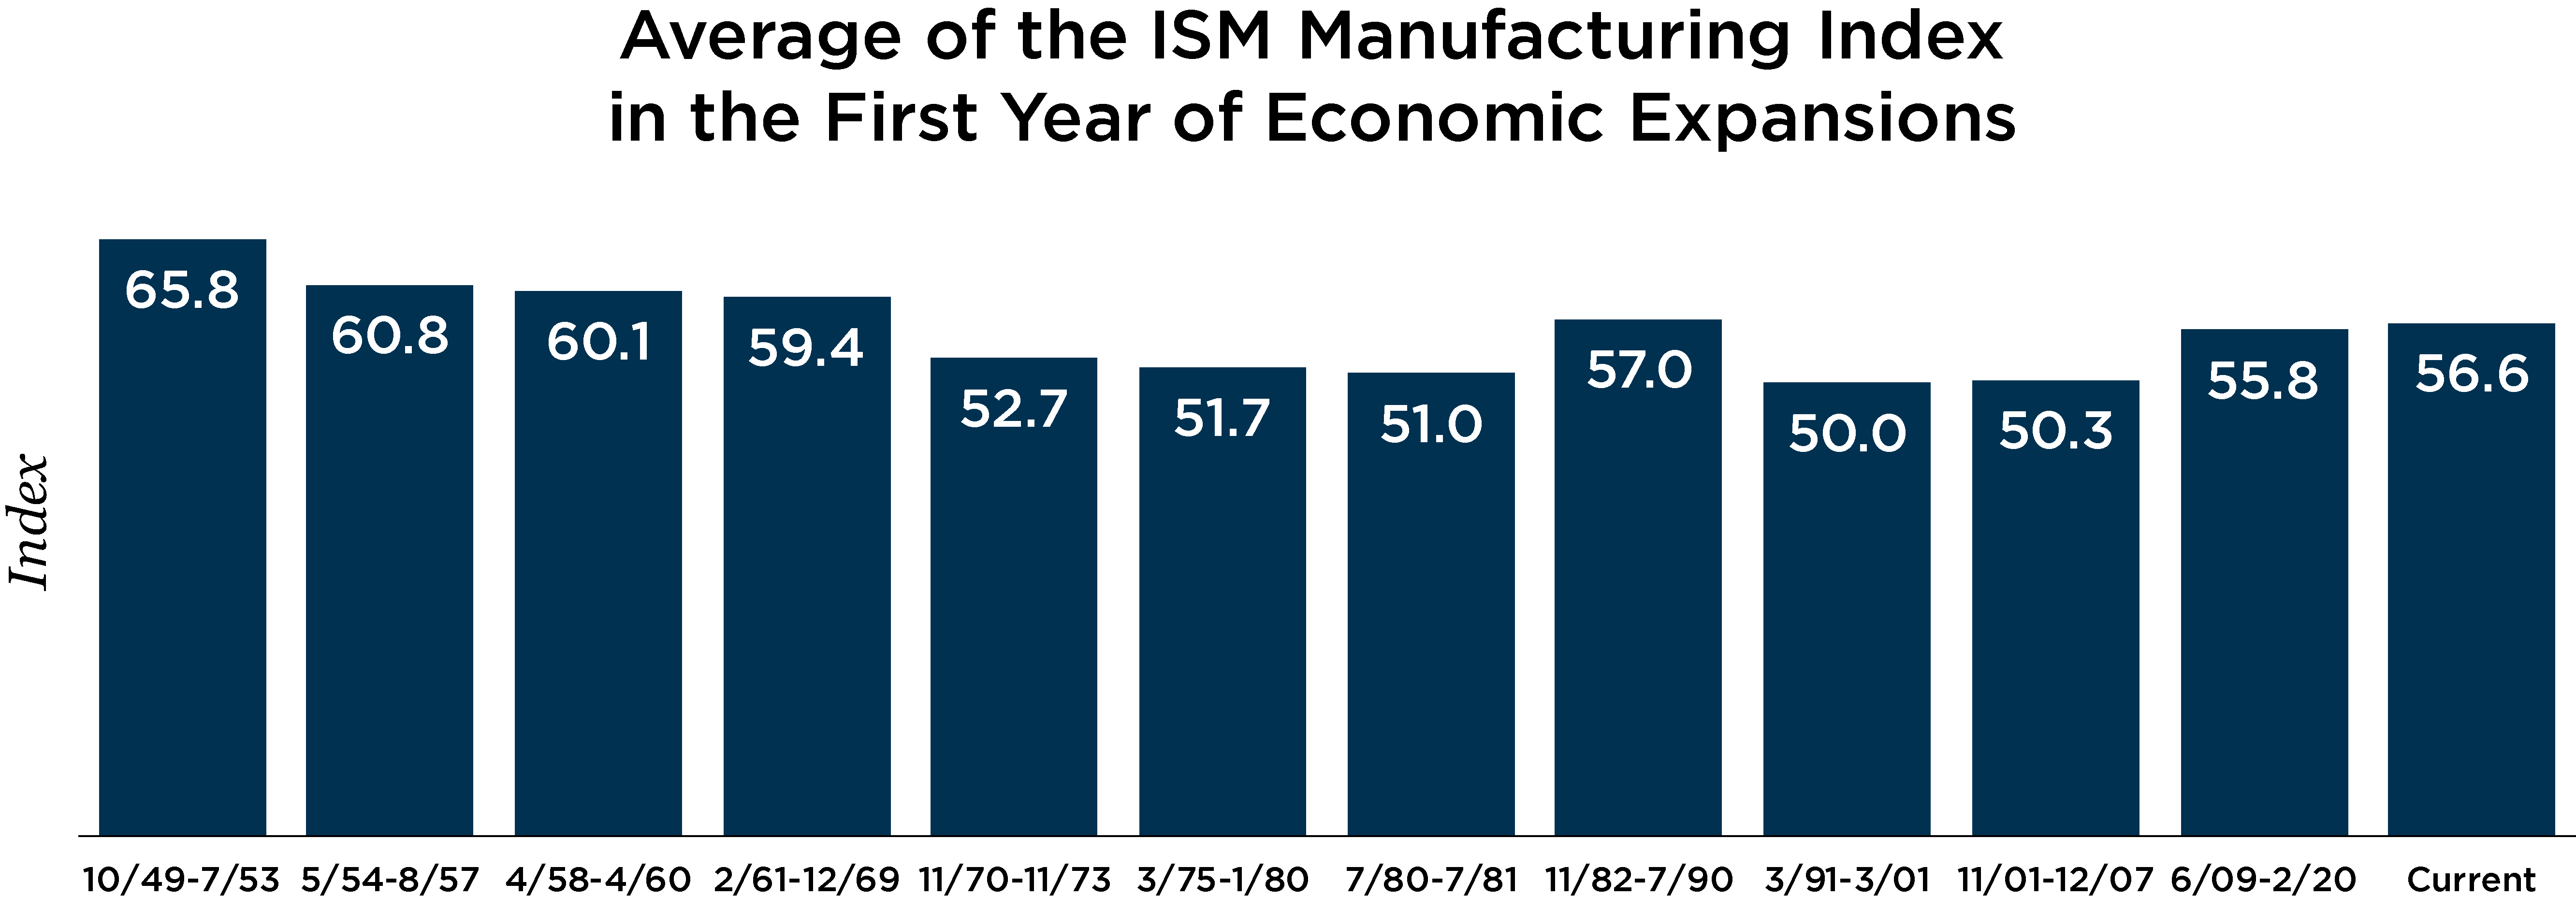 Graph depicting average of the ISM Manufacturing Index in the first year of economic expansions